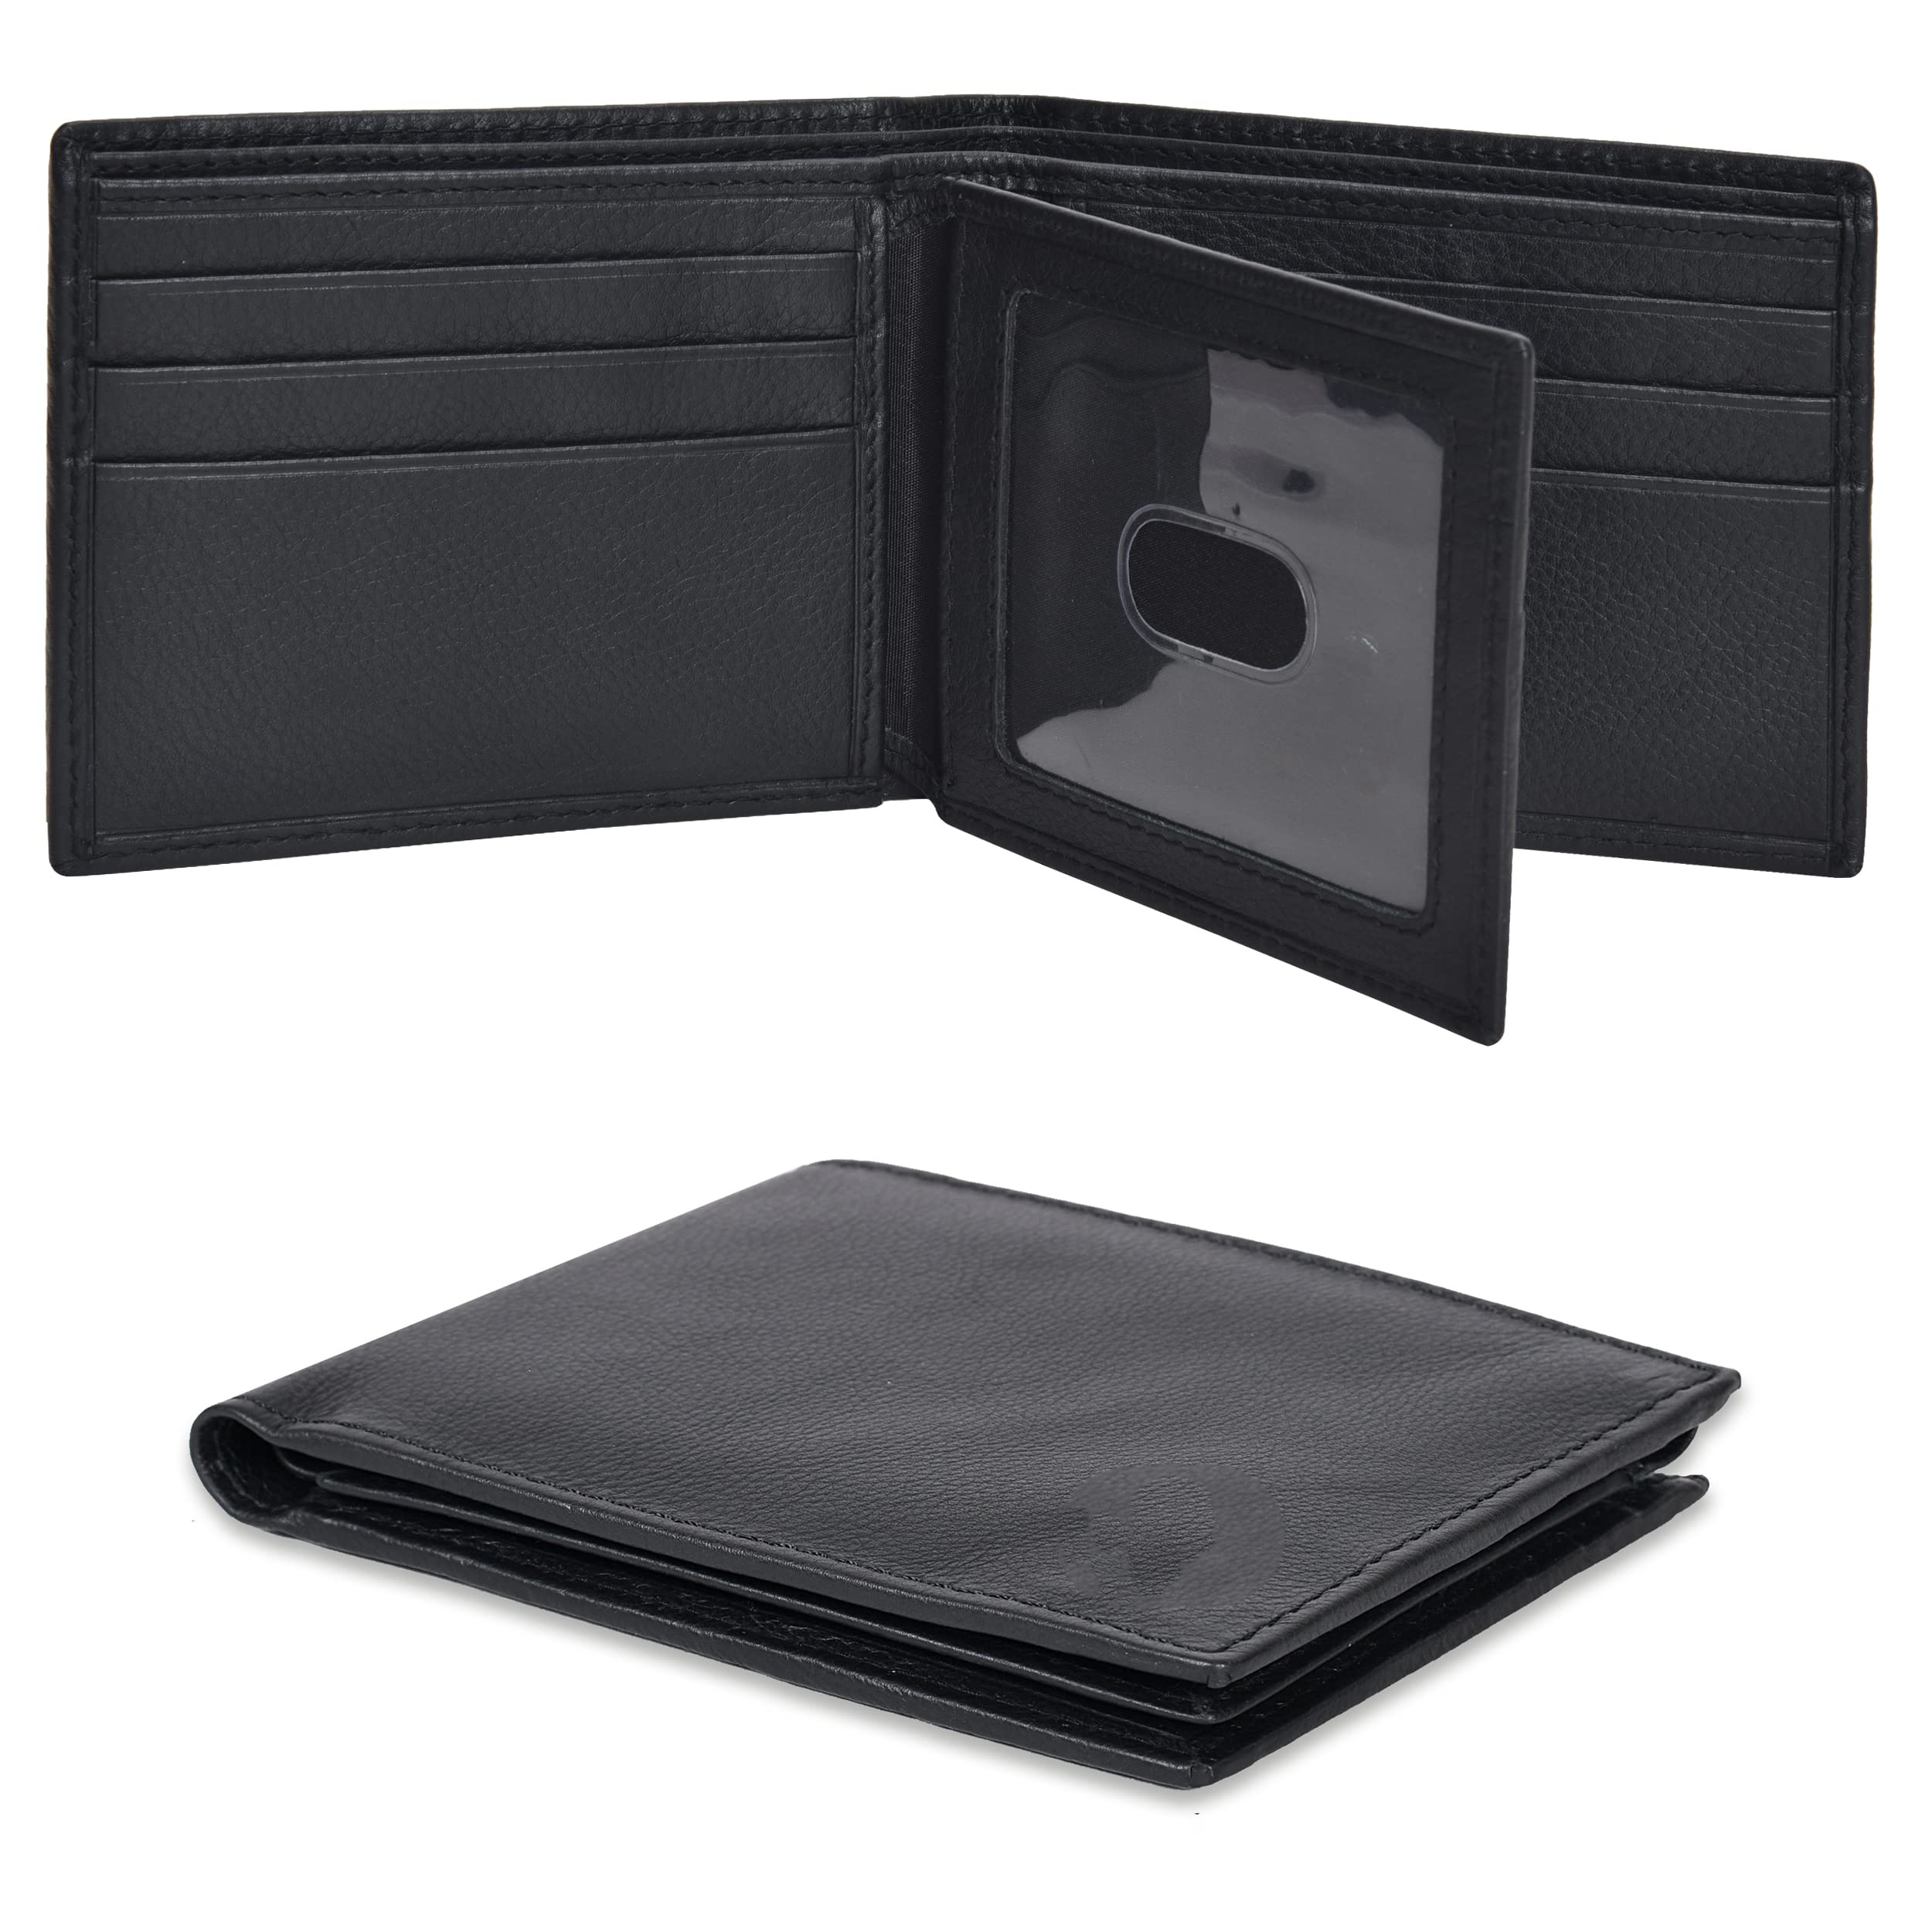 Real Leather Bifold Wallet for Men - Wallets with 9 Credit Cards 1 ID Window Slim Minimalist Front Pocket Billfold